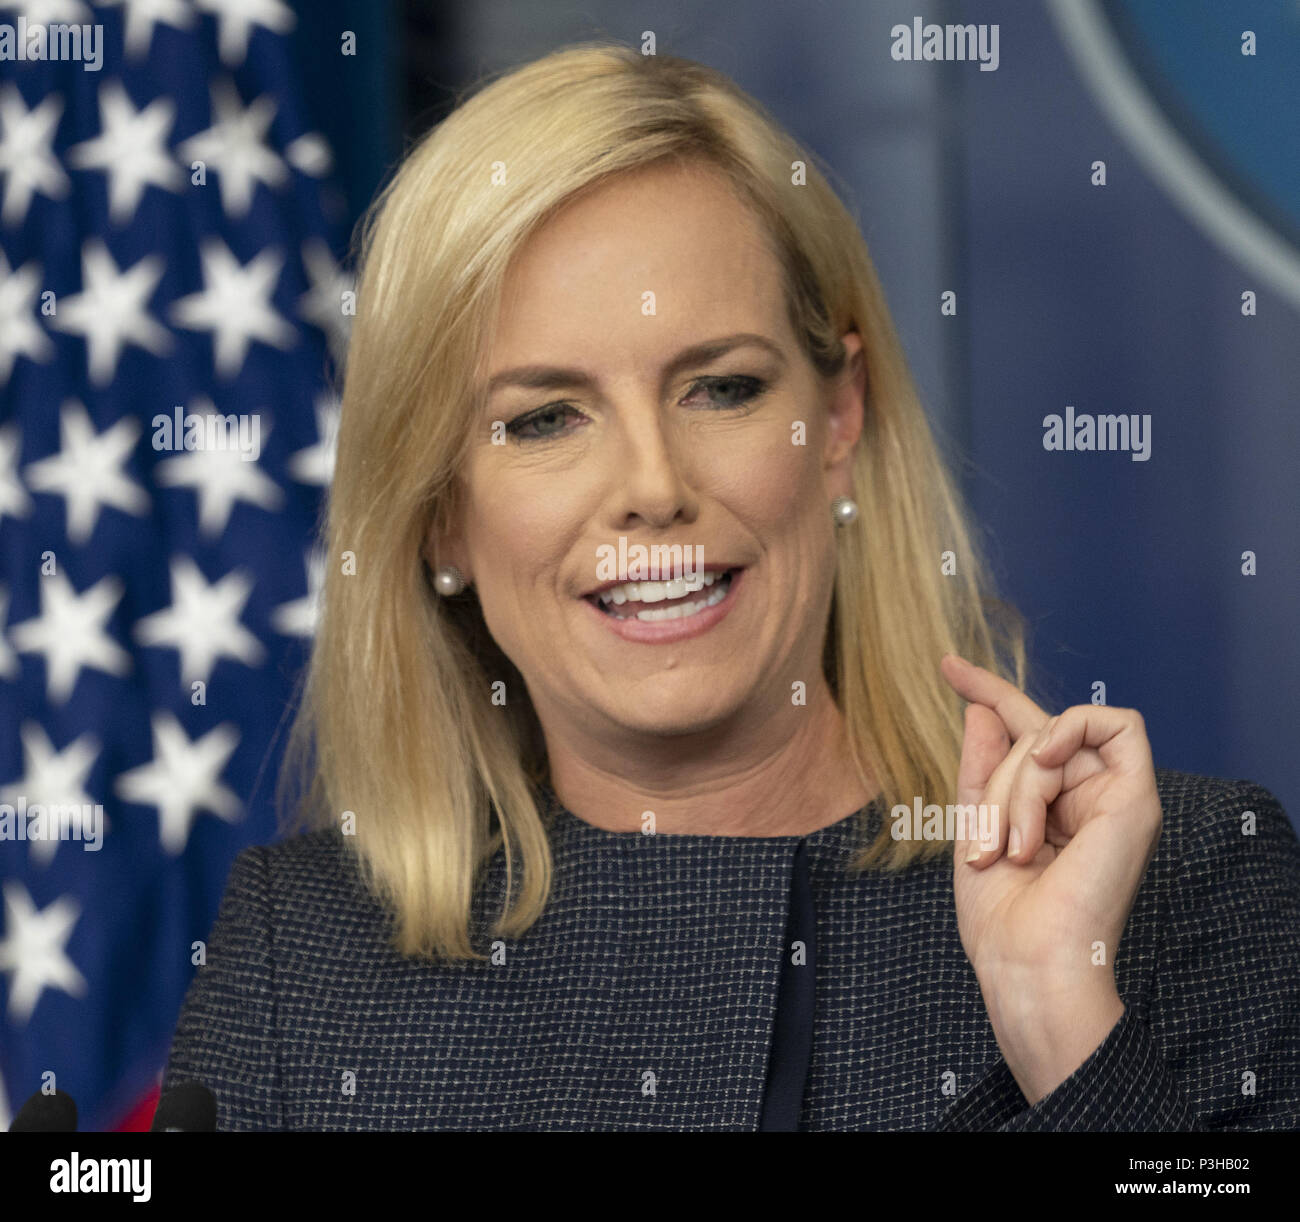 Washington, District of Columbia, USA. 18th June, 2018. United States Secretary of Homeland Security Kirstjen Nielsen holds a news briefing at the White House in Washington, DC, June 18, 2018. Credit: Chris Kleponis/CNP Credit: Chris Kleponis/CNP/ZUMA Wire/Alamy Live News Stock Photo